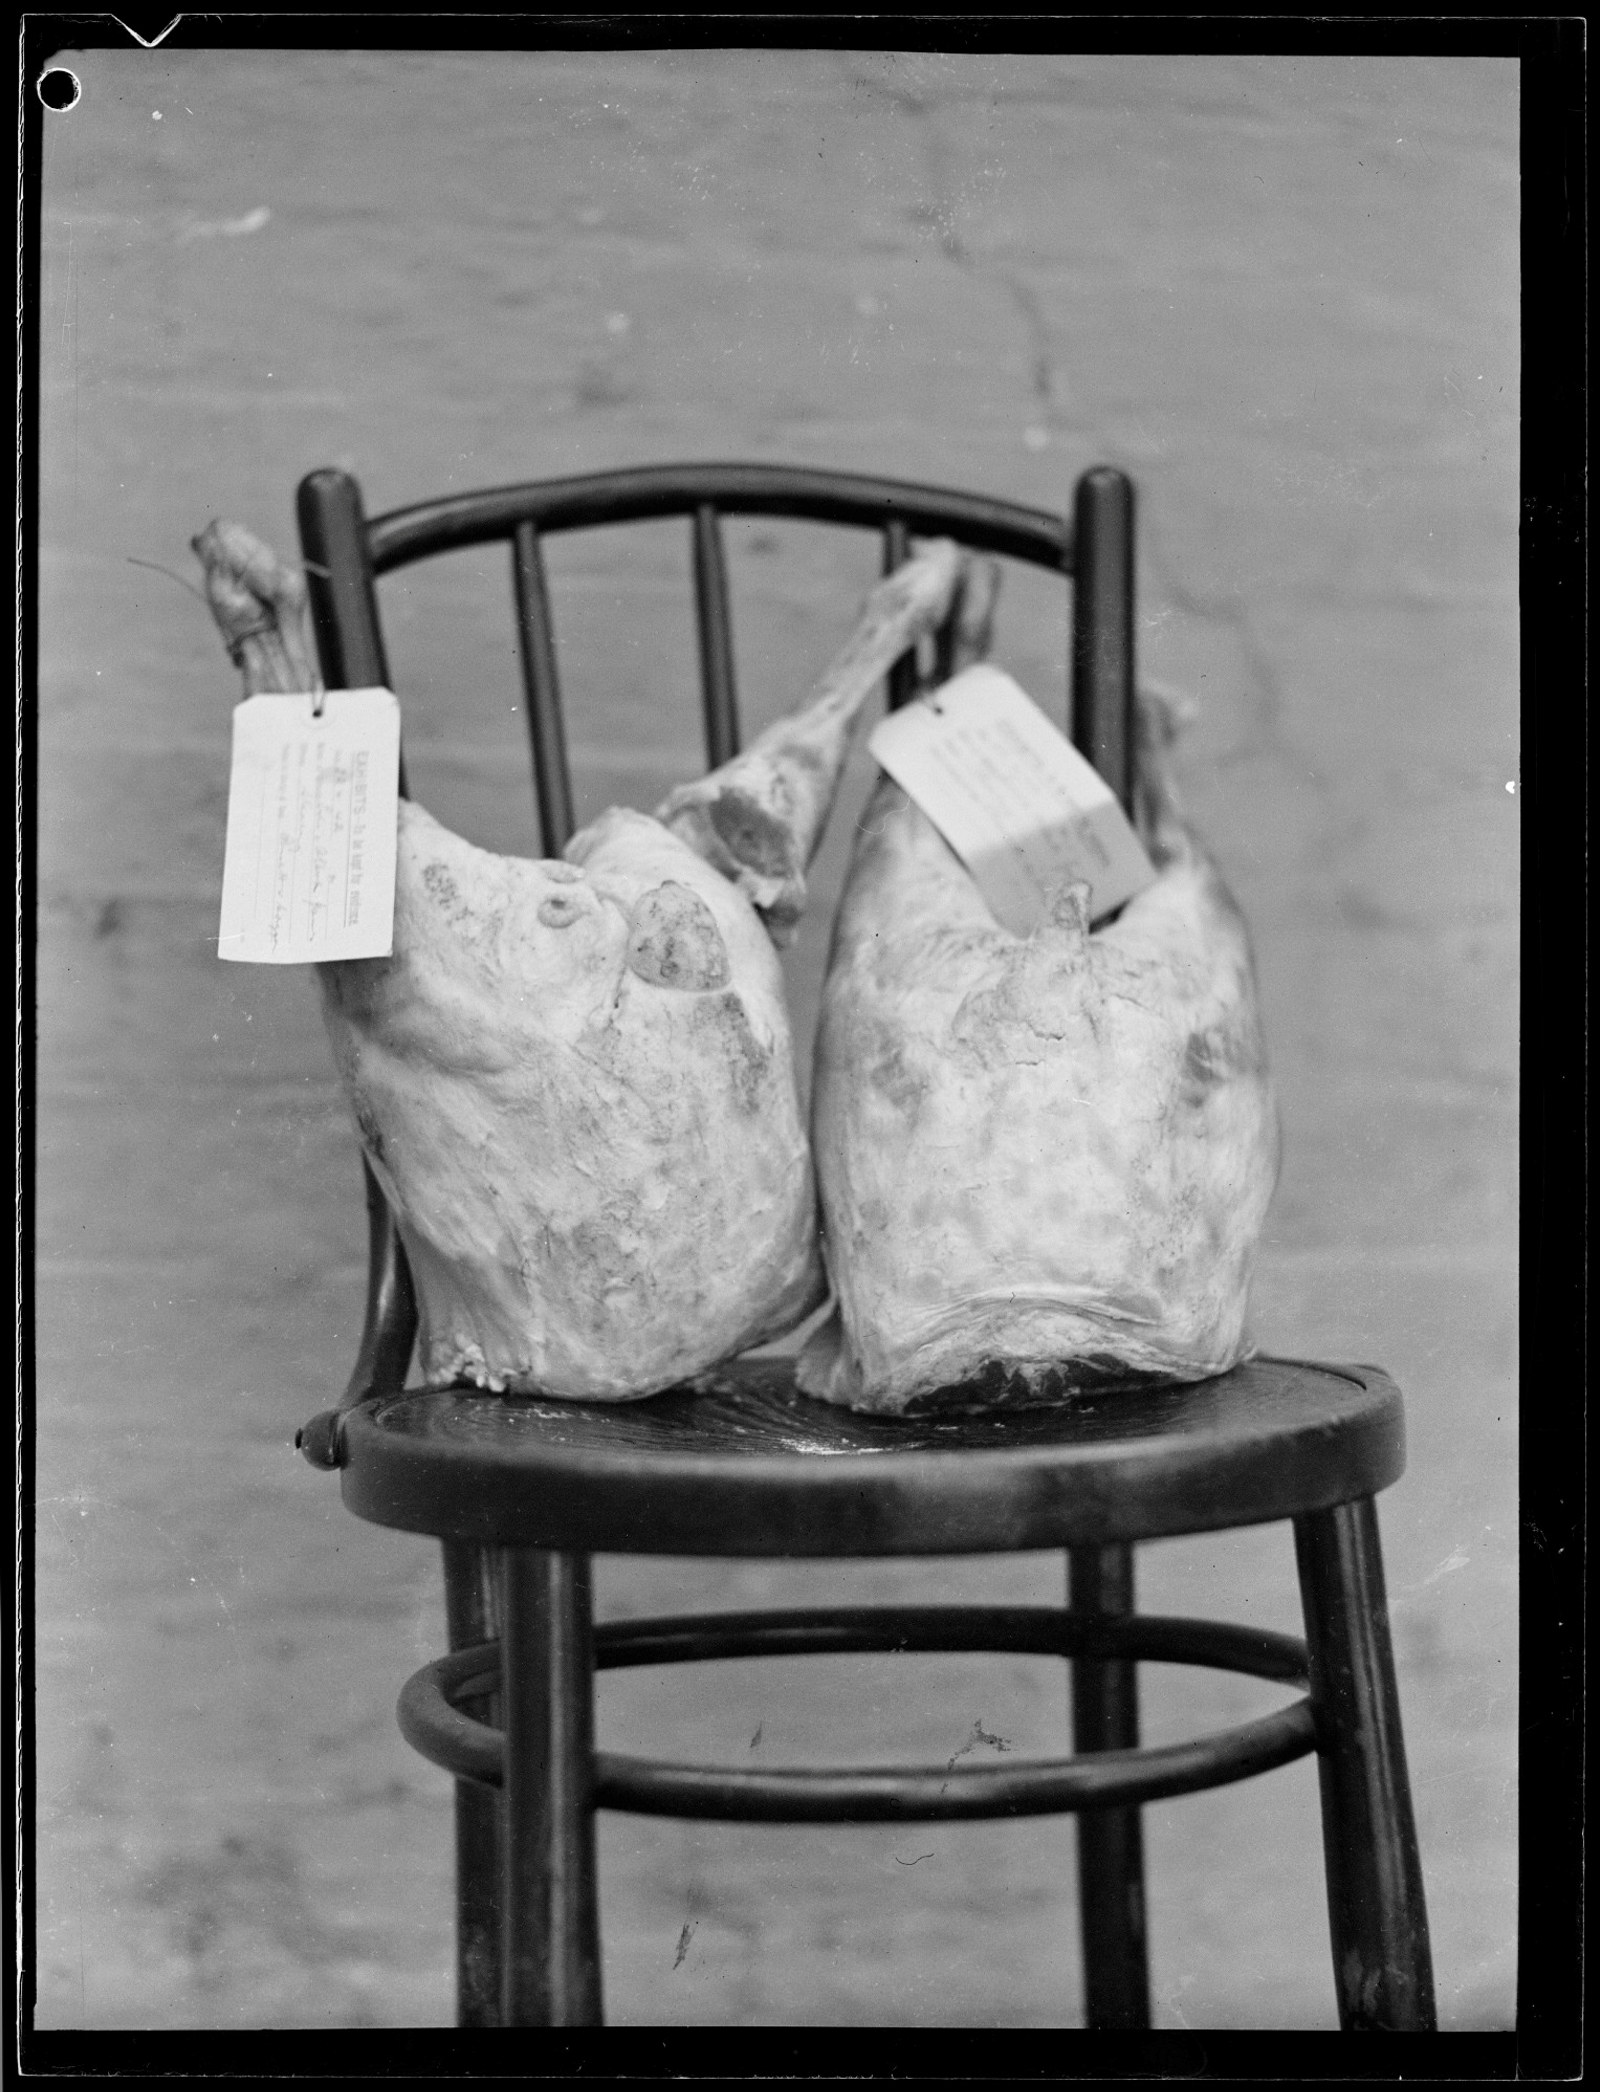 Two half pig carcasses placed on a wooden chair with tags reading, EXHIBITS - To be kept for evidence.